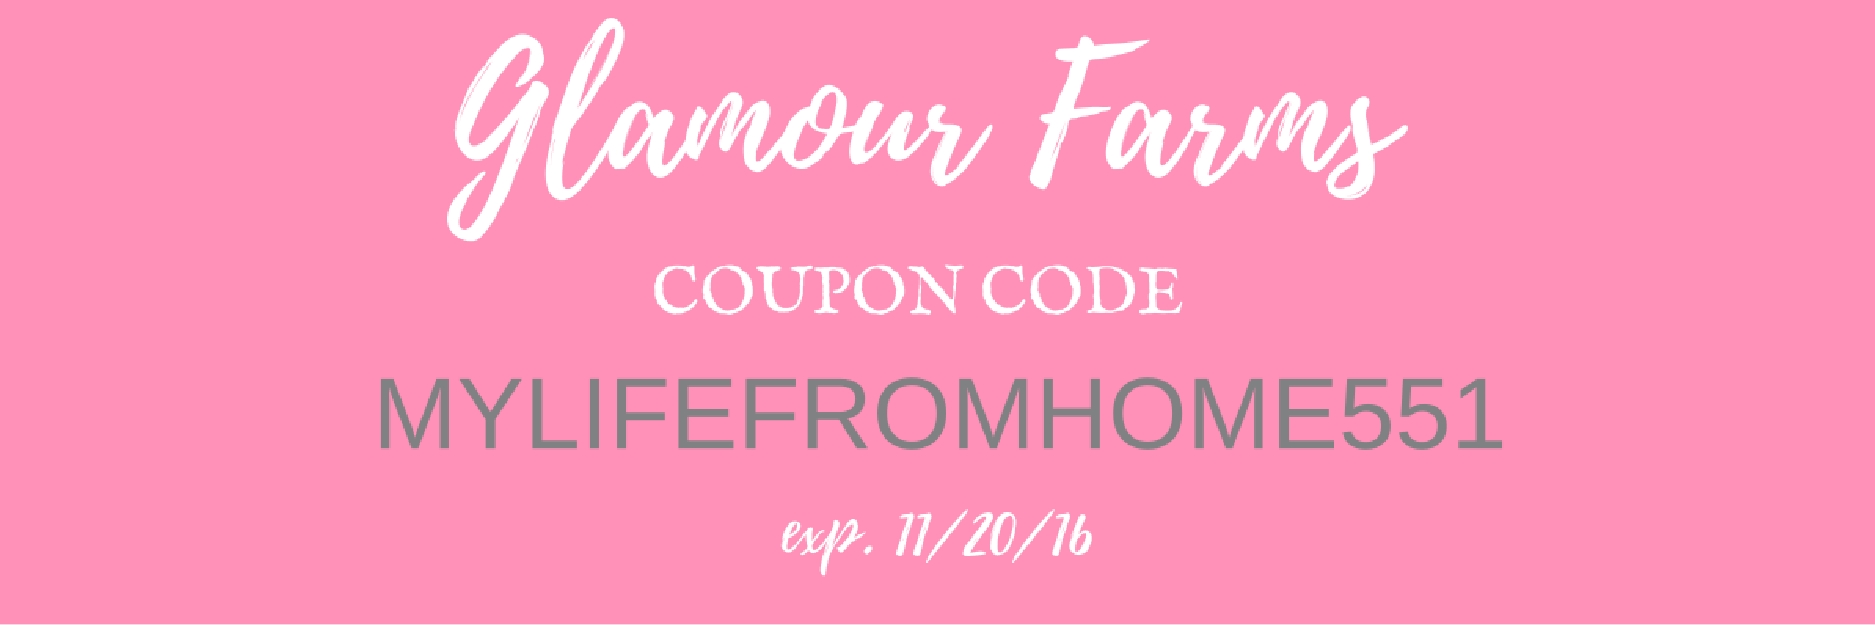 glamour-farms-discount-code